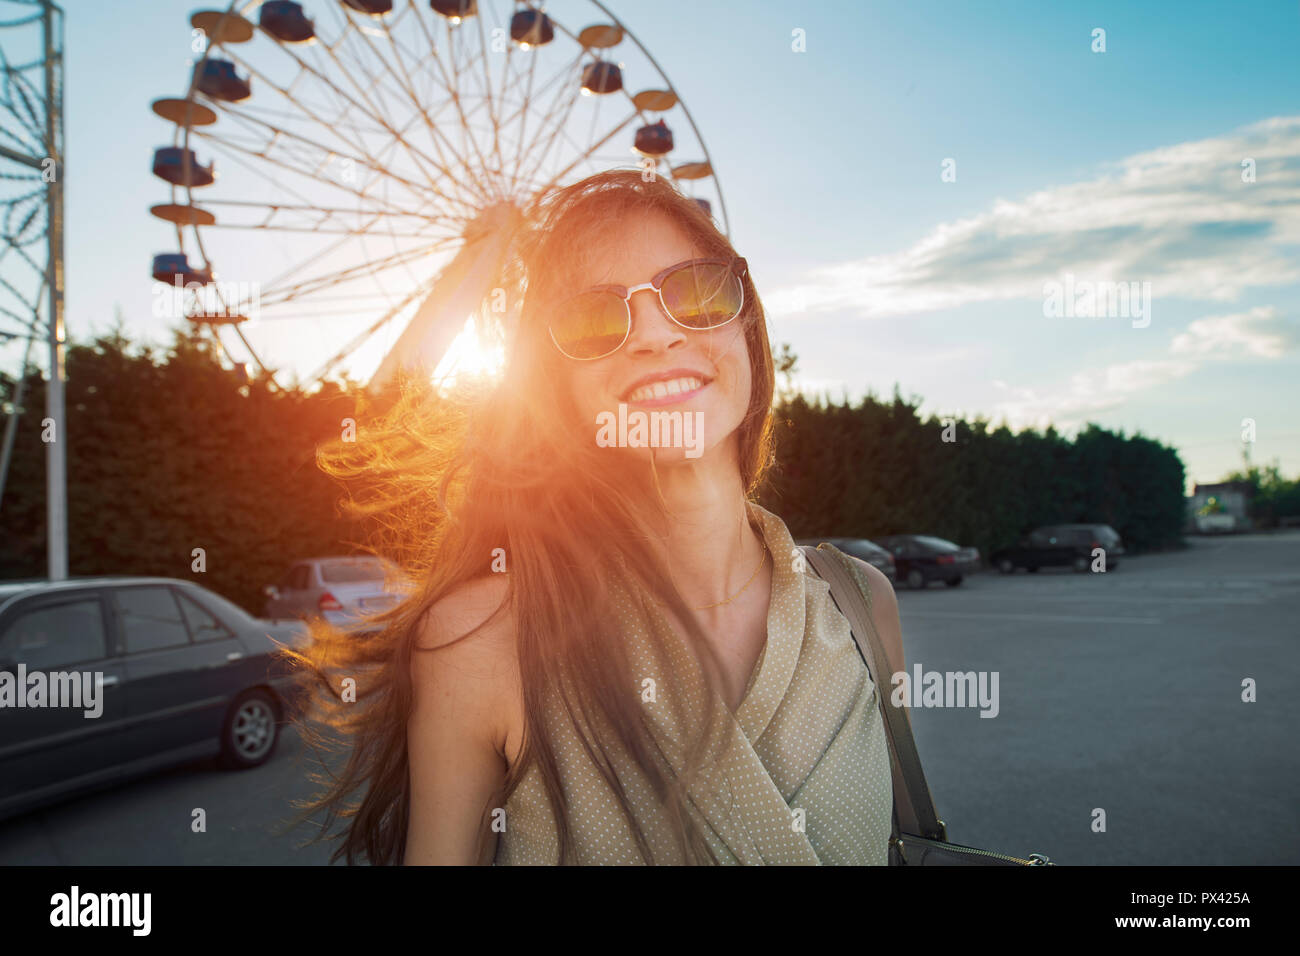 woman smiling cheerfully in front of a ferris wheel Stock Photo